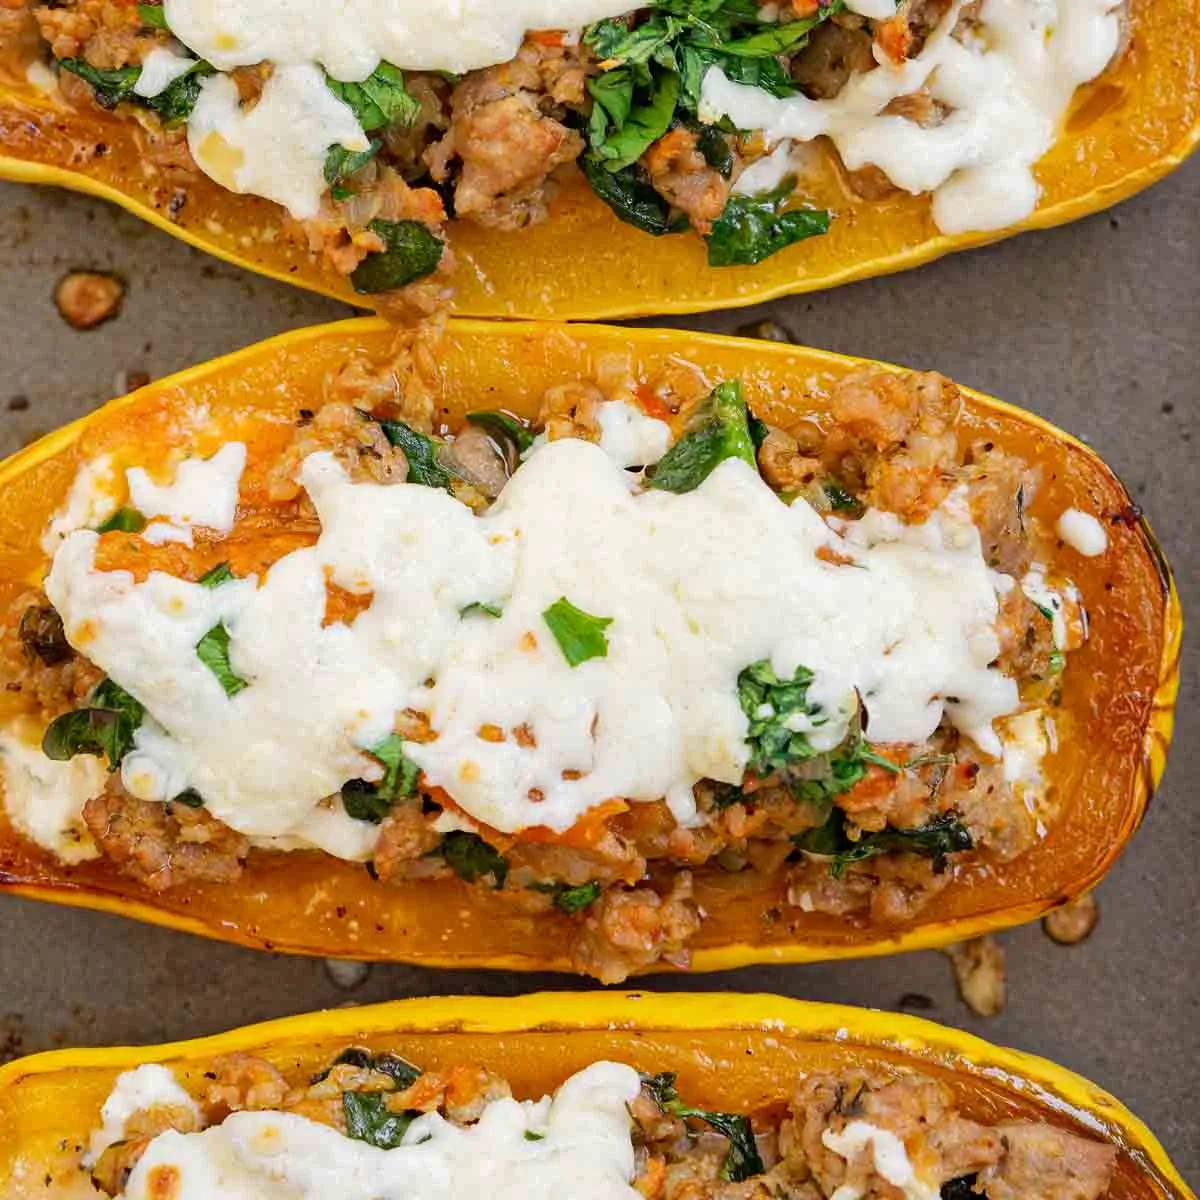 Sausage stuffed delicata squash with melted cheese on top.